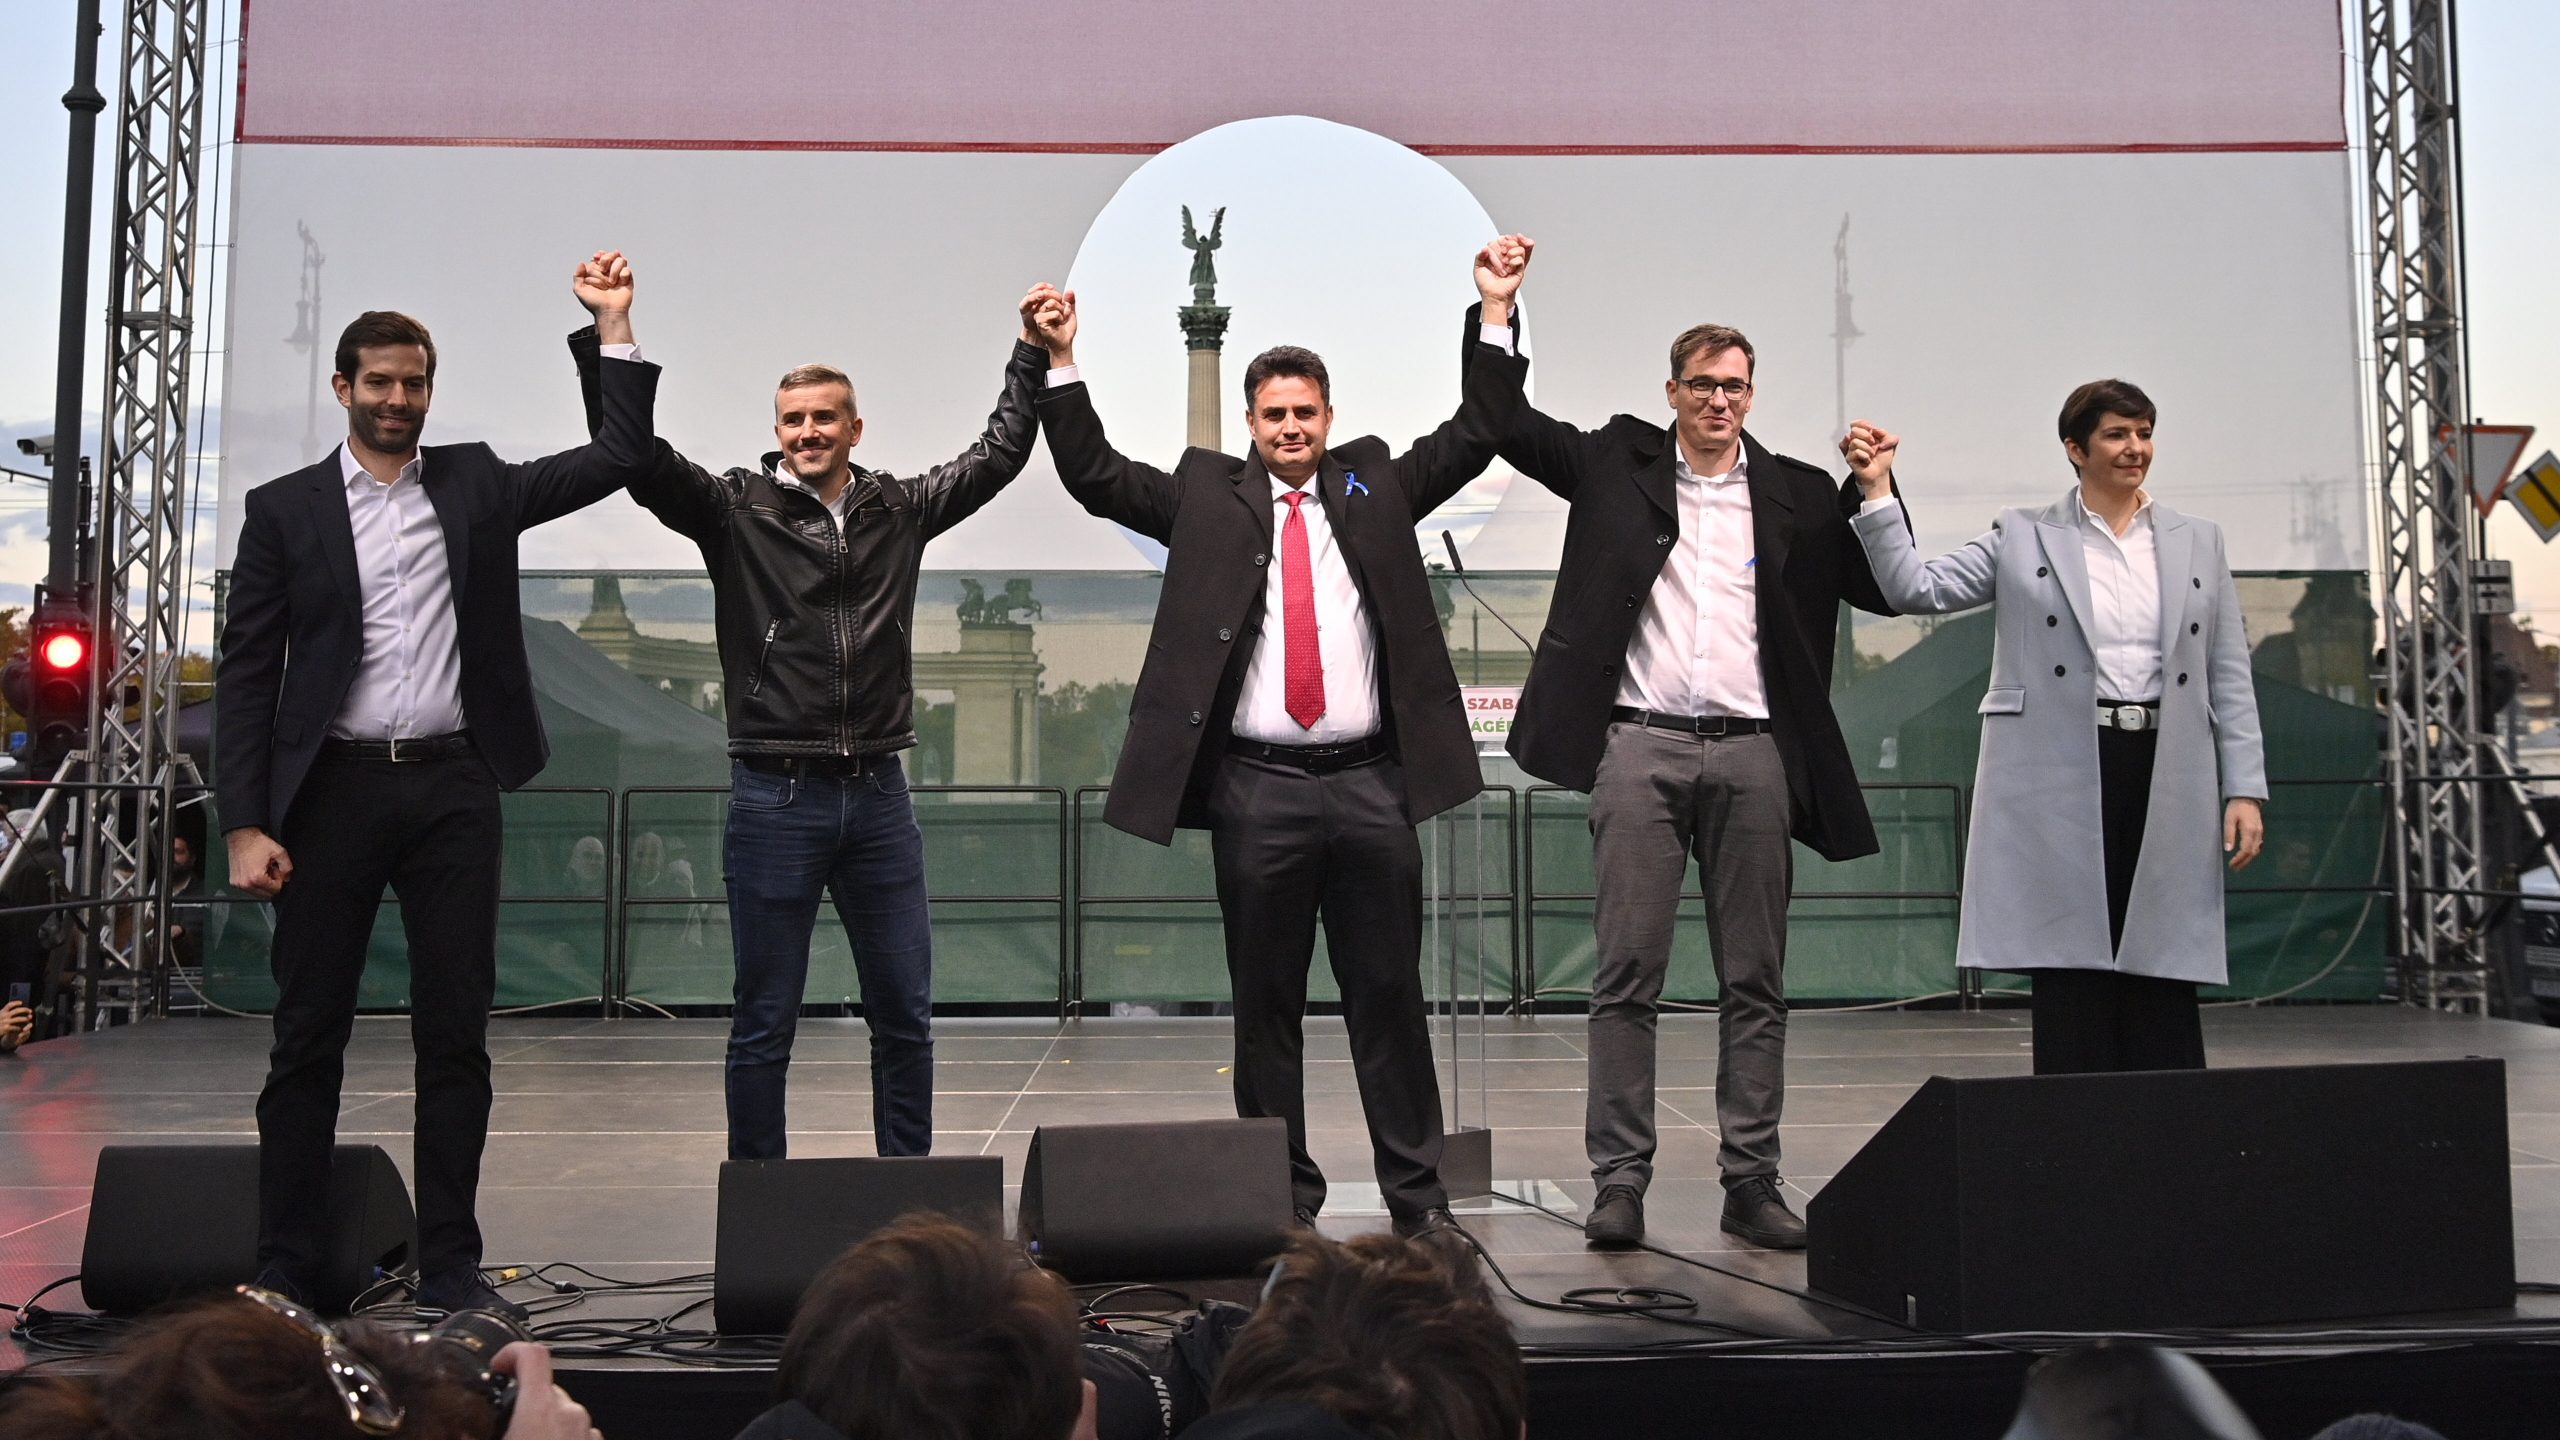 Direkt36 Reveals Major Disunity in Hungary's 2022 Opposition Campaign